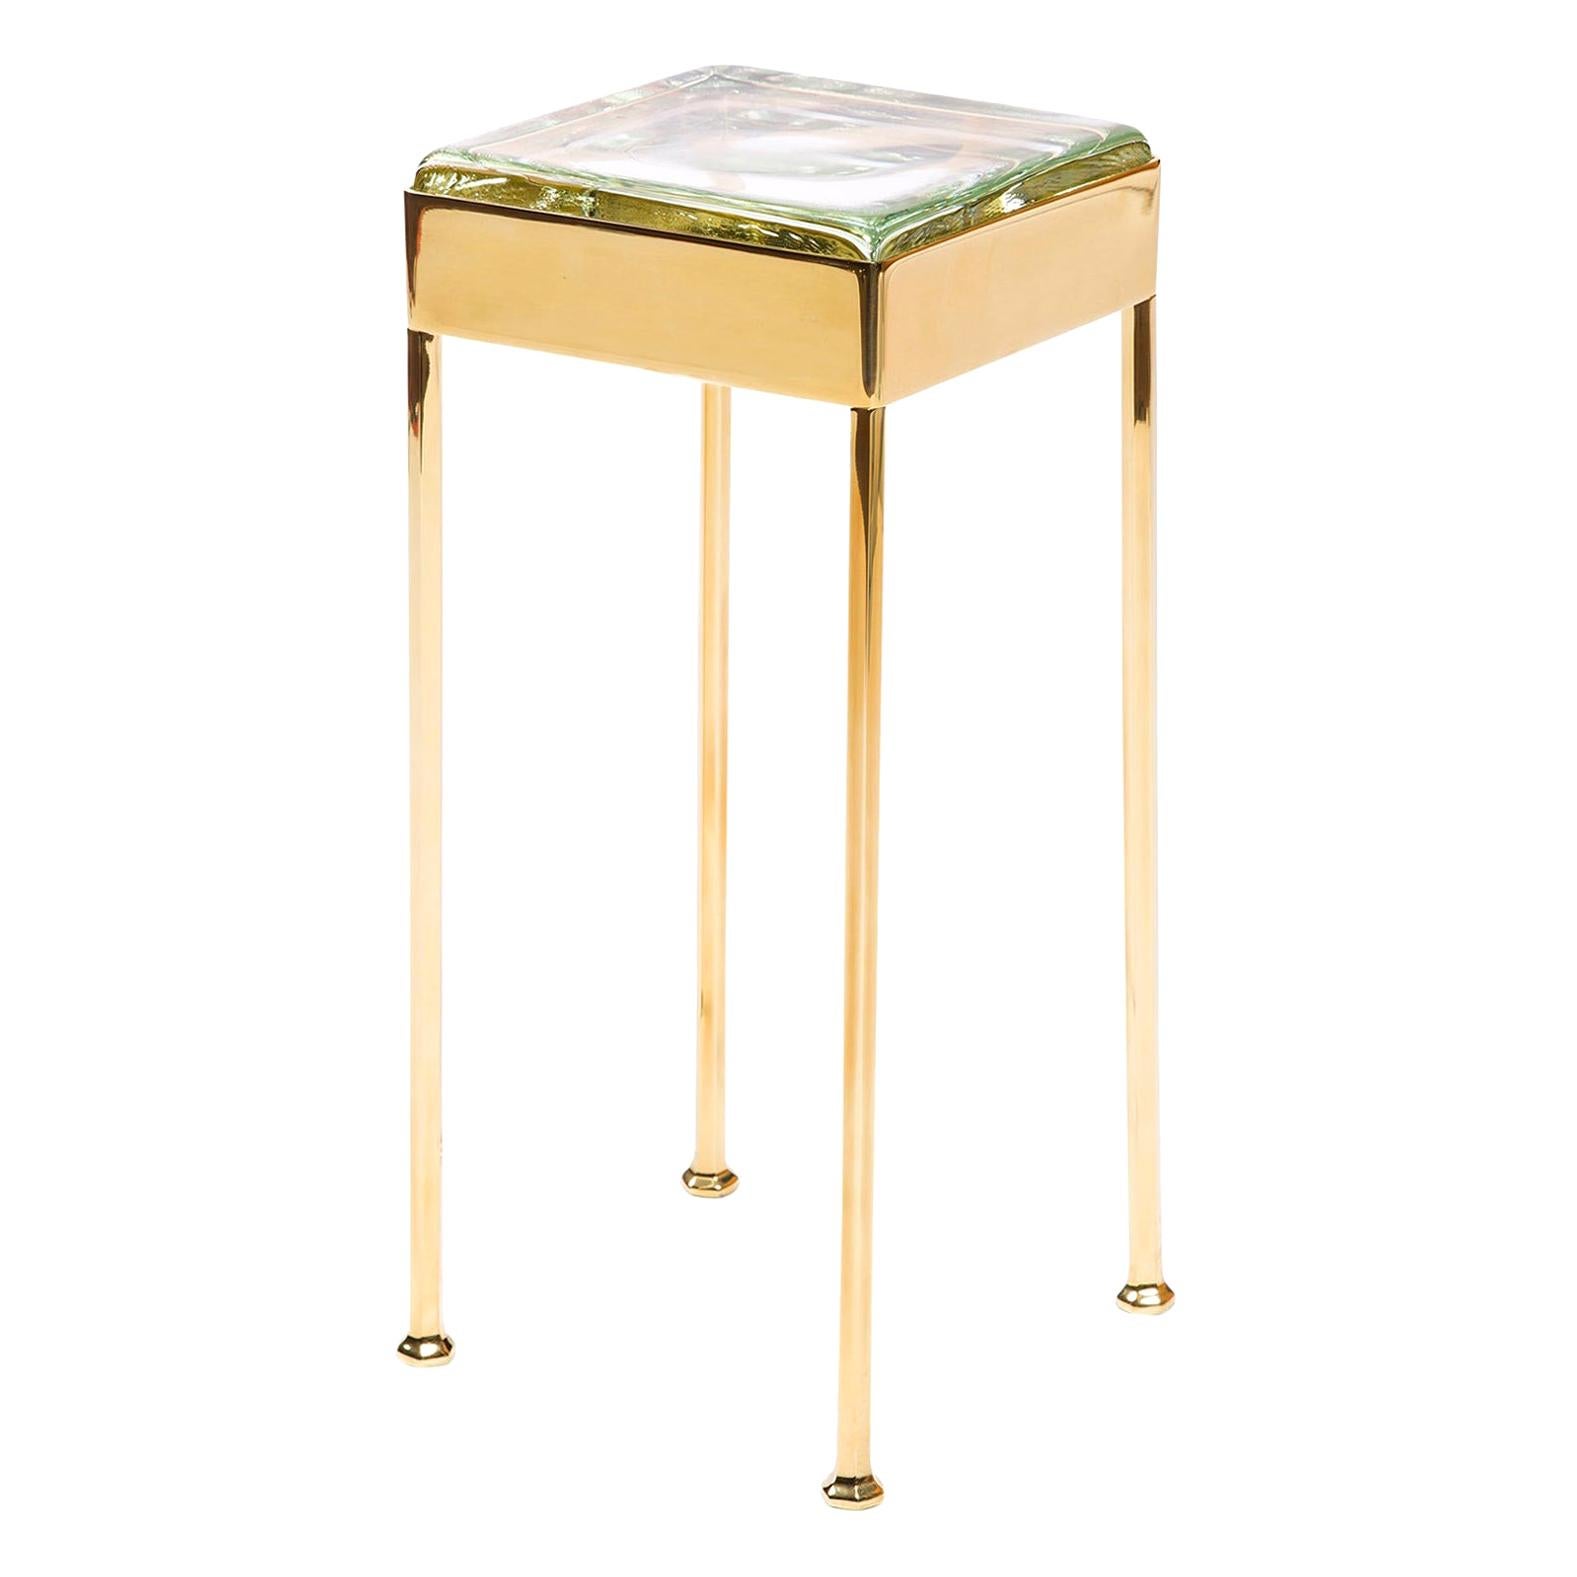 Wyeth Original Glass Block Cocktail / Side Table in Polished Bronze